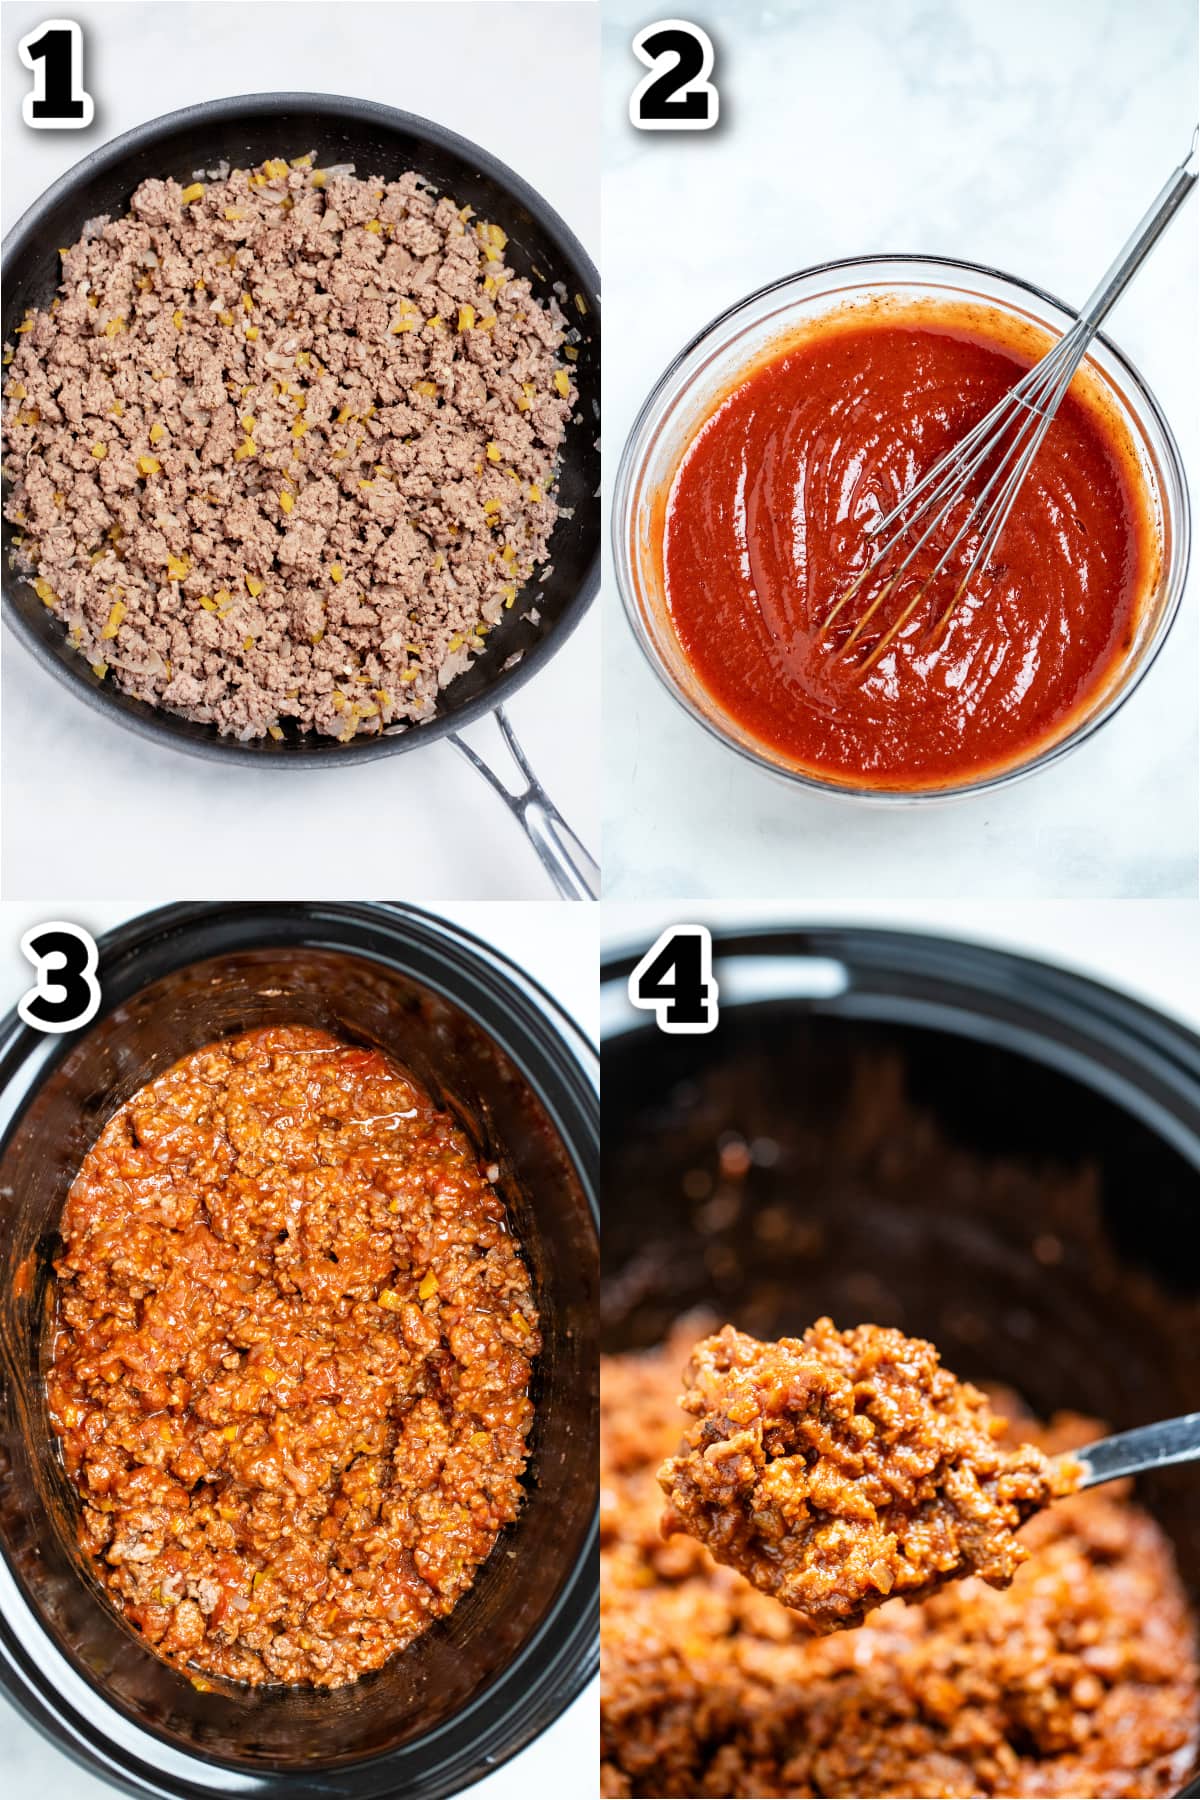 Step by step photos for how to make slow cooker sloppy joes.